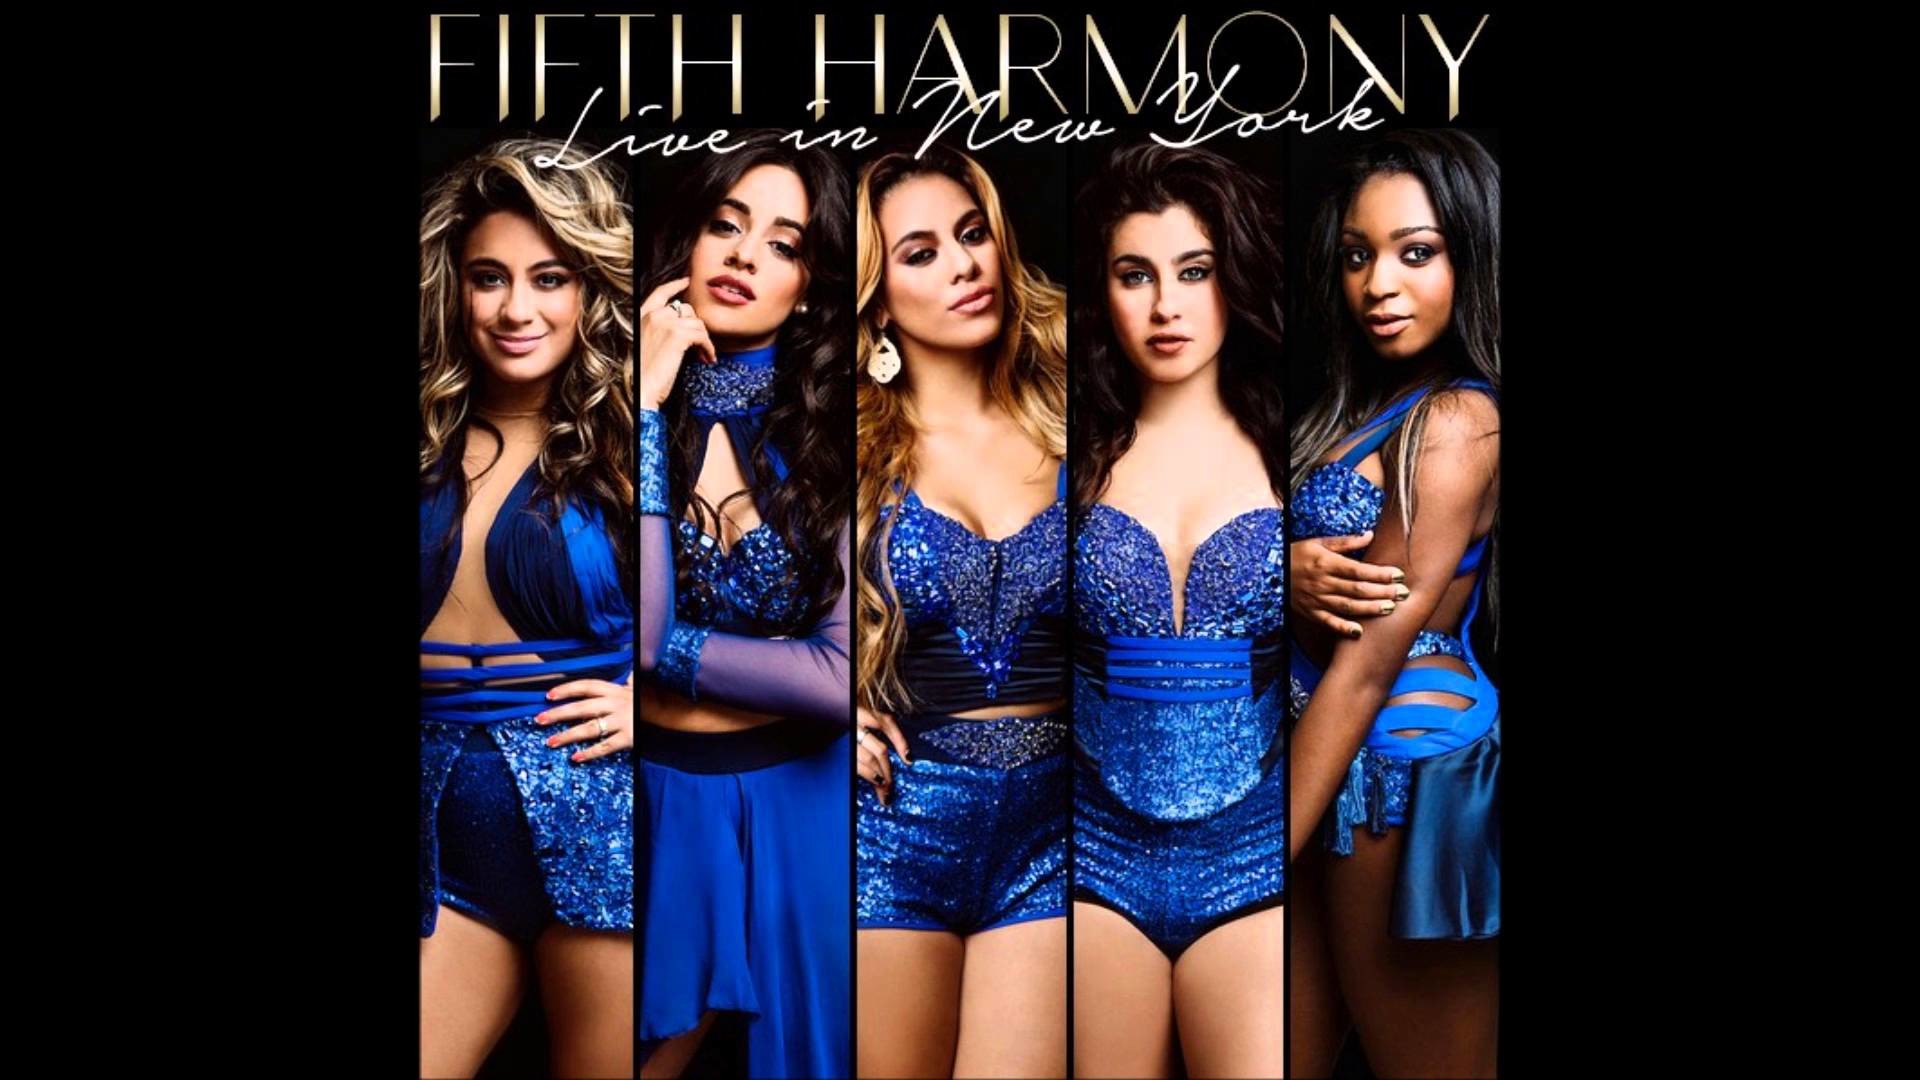 1920x1080 ... Fifth Harmony Wallpapers uploaded by Jaqueline ...